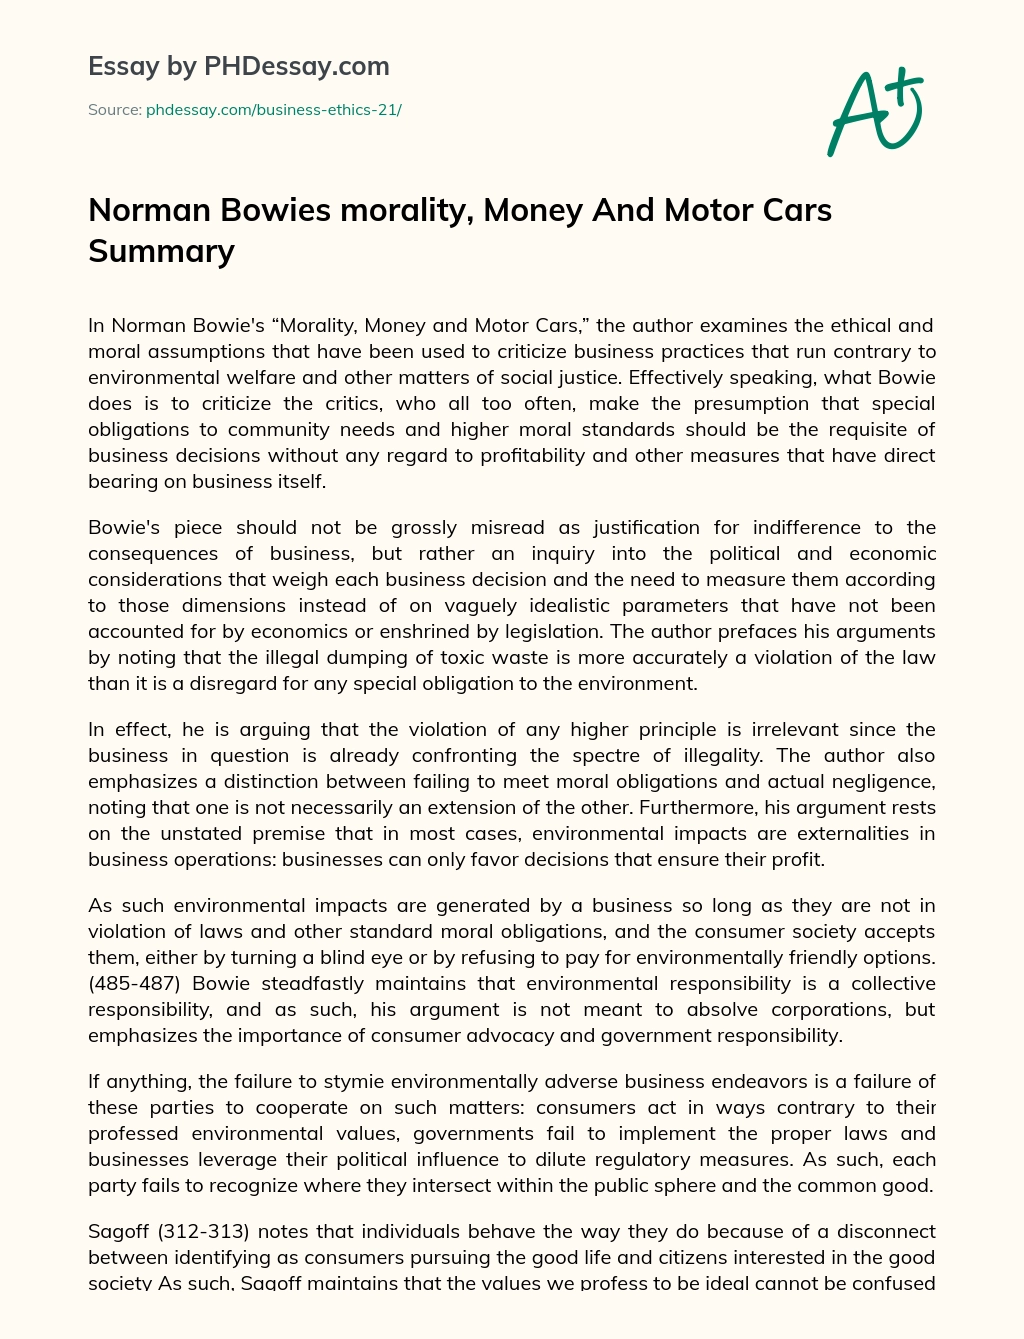 Norman Bowies morality, Money And Motor Cars Summary essay